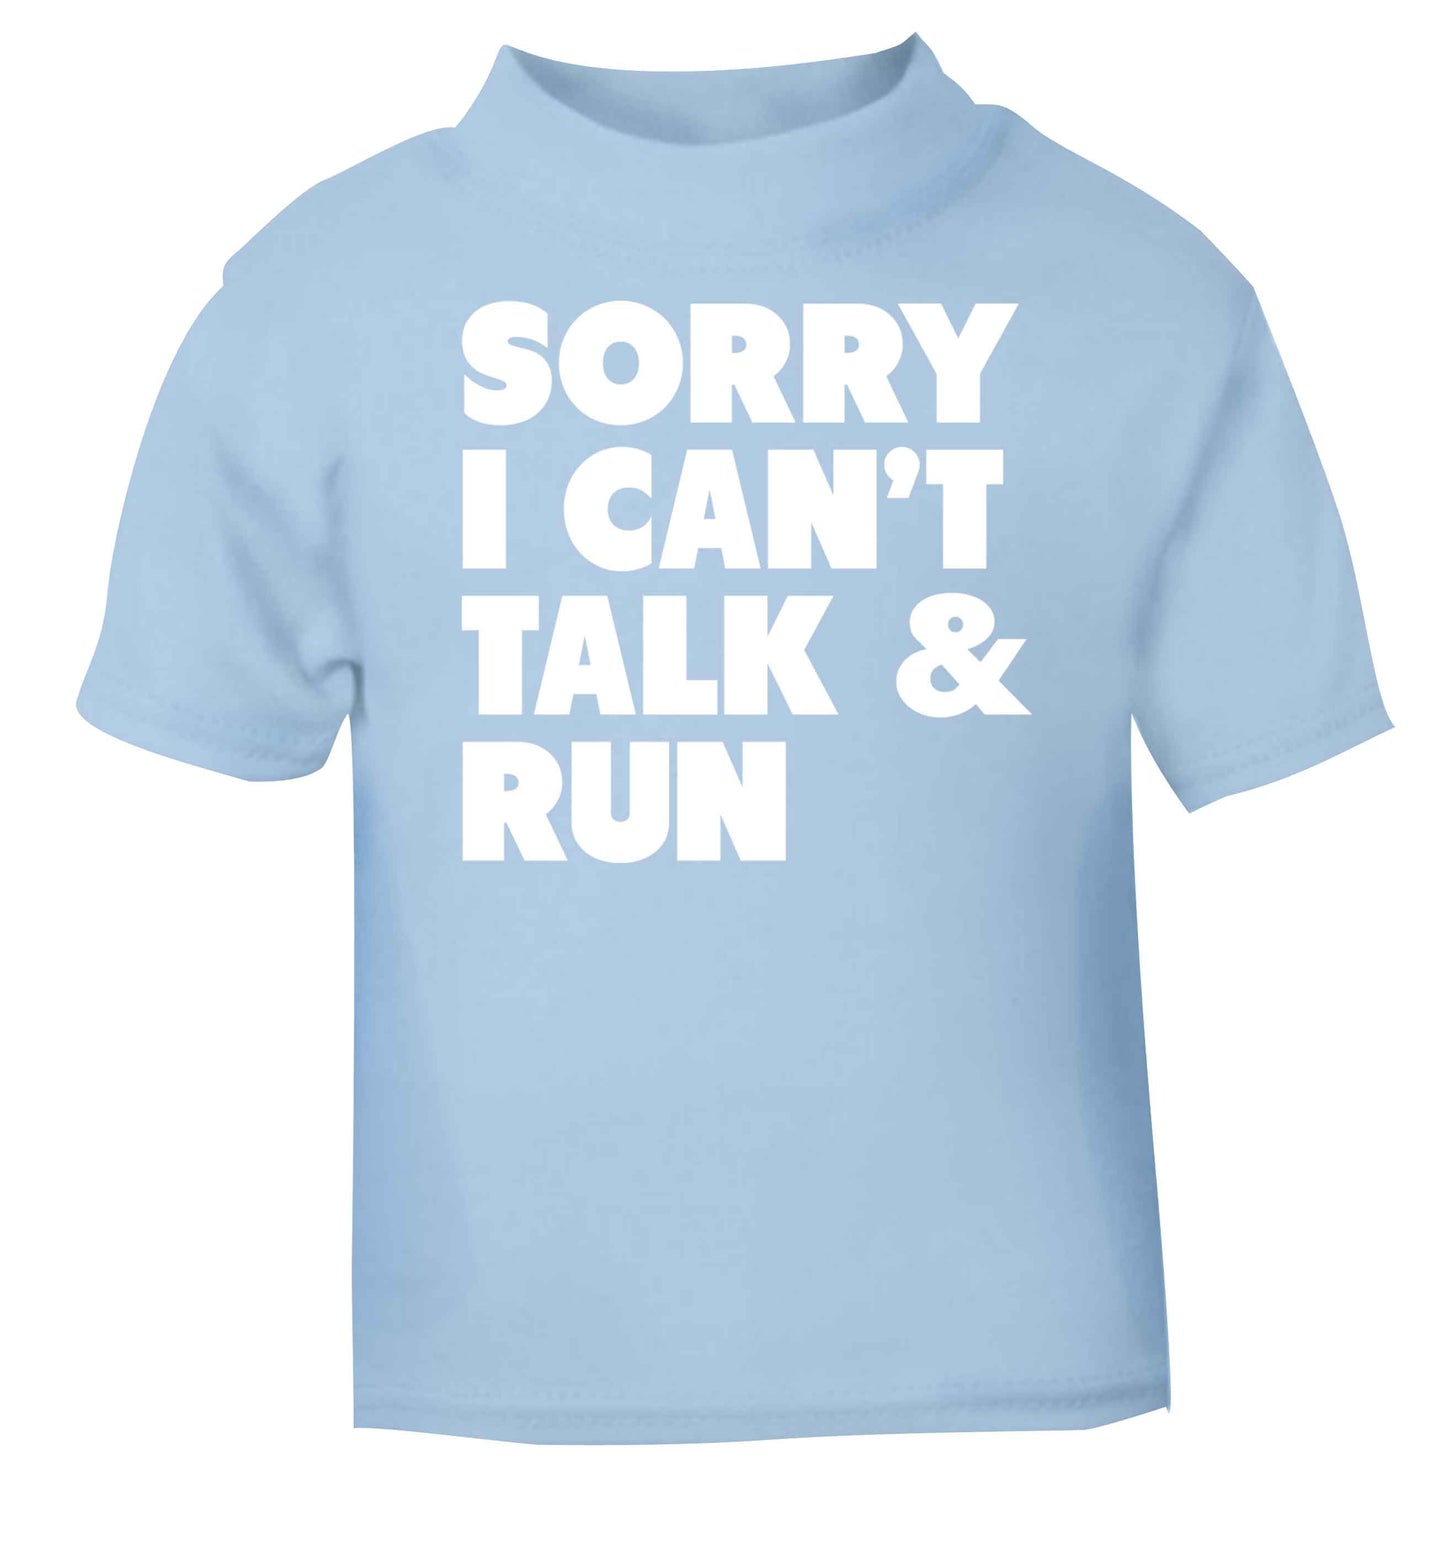 Sorry I can't talk and run light blue baby toddler Tshirt 2 Years